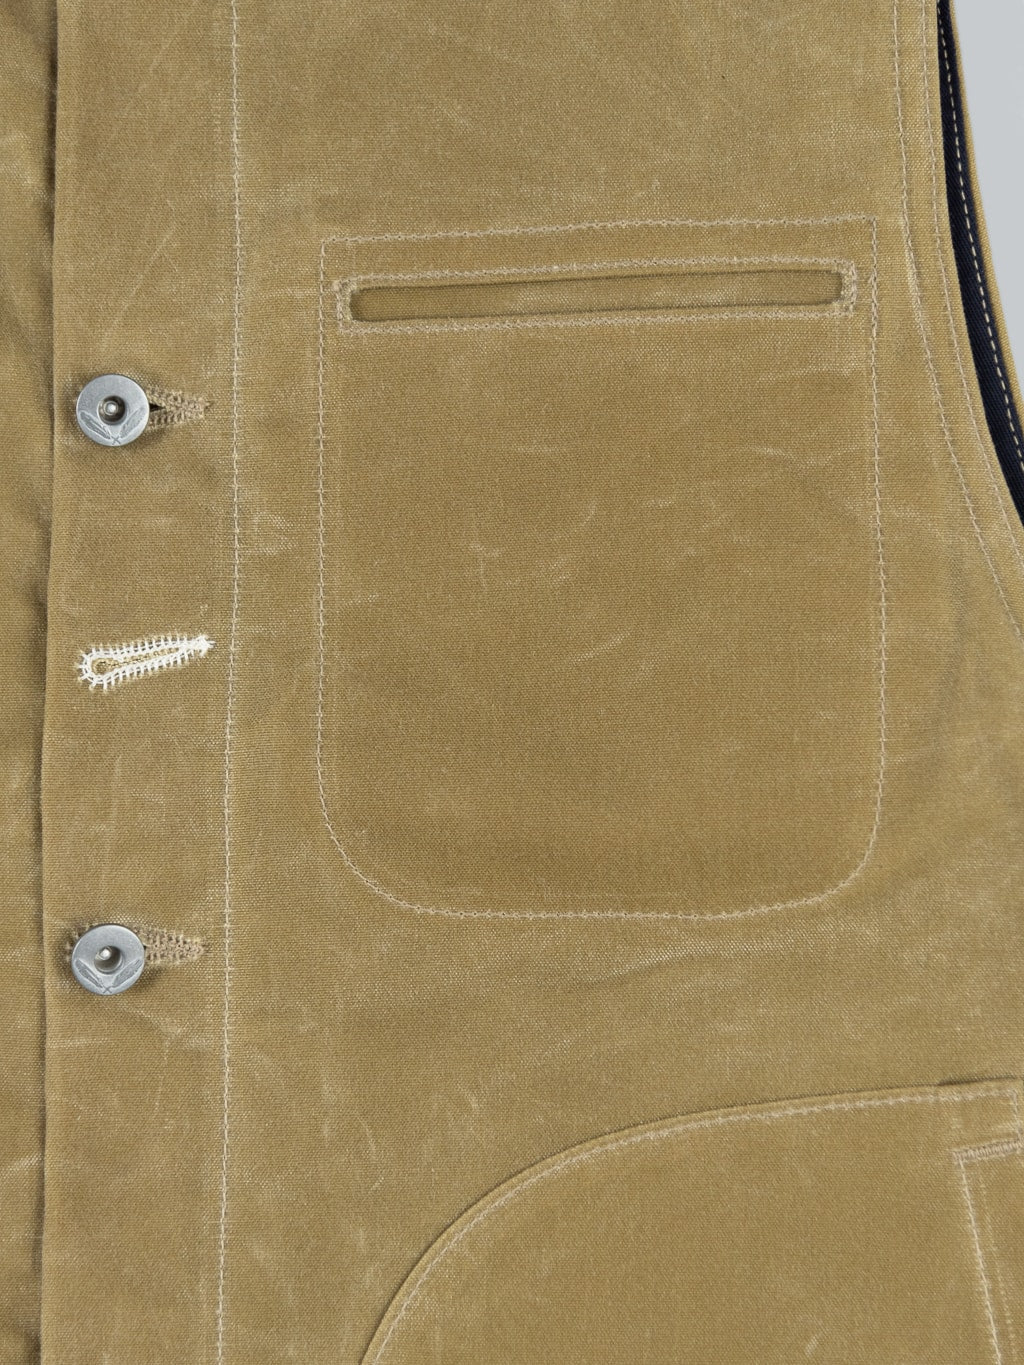 rogue territory lined waxed canvas supply vest 10oz tan details